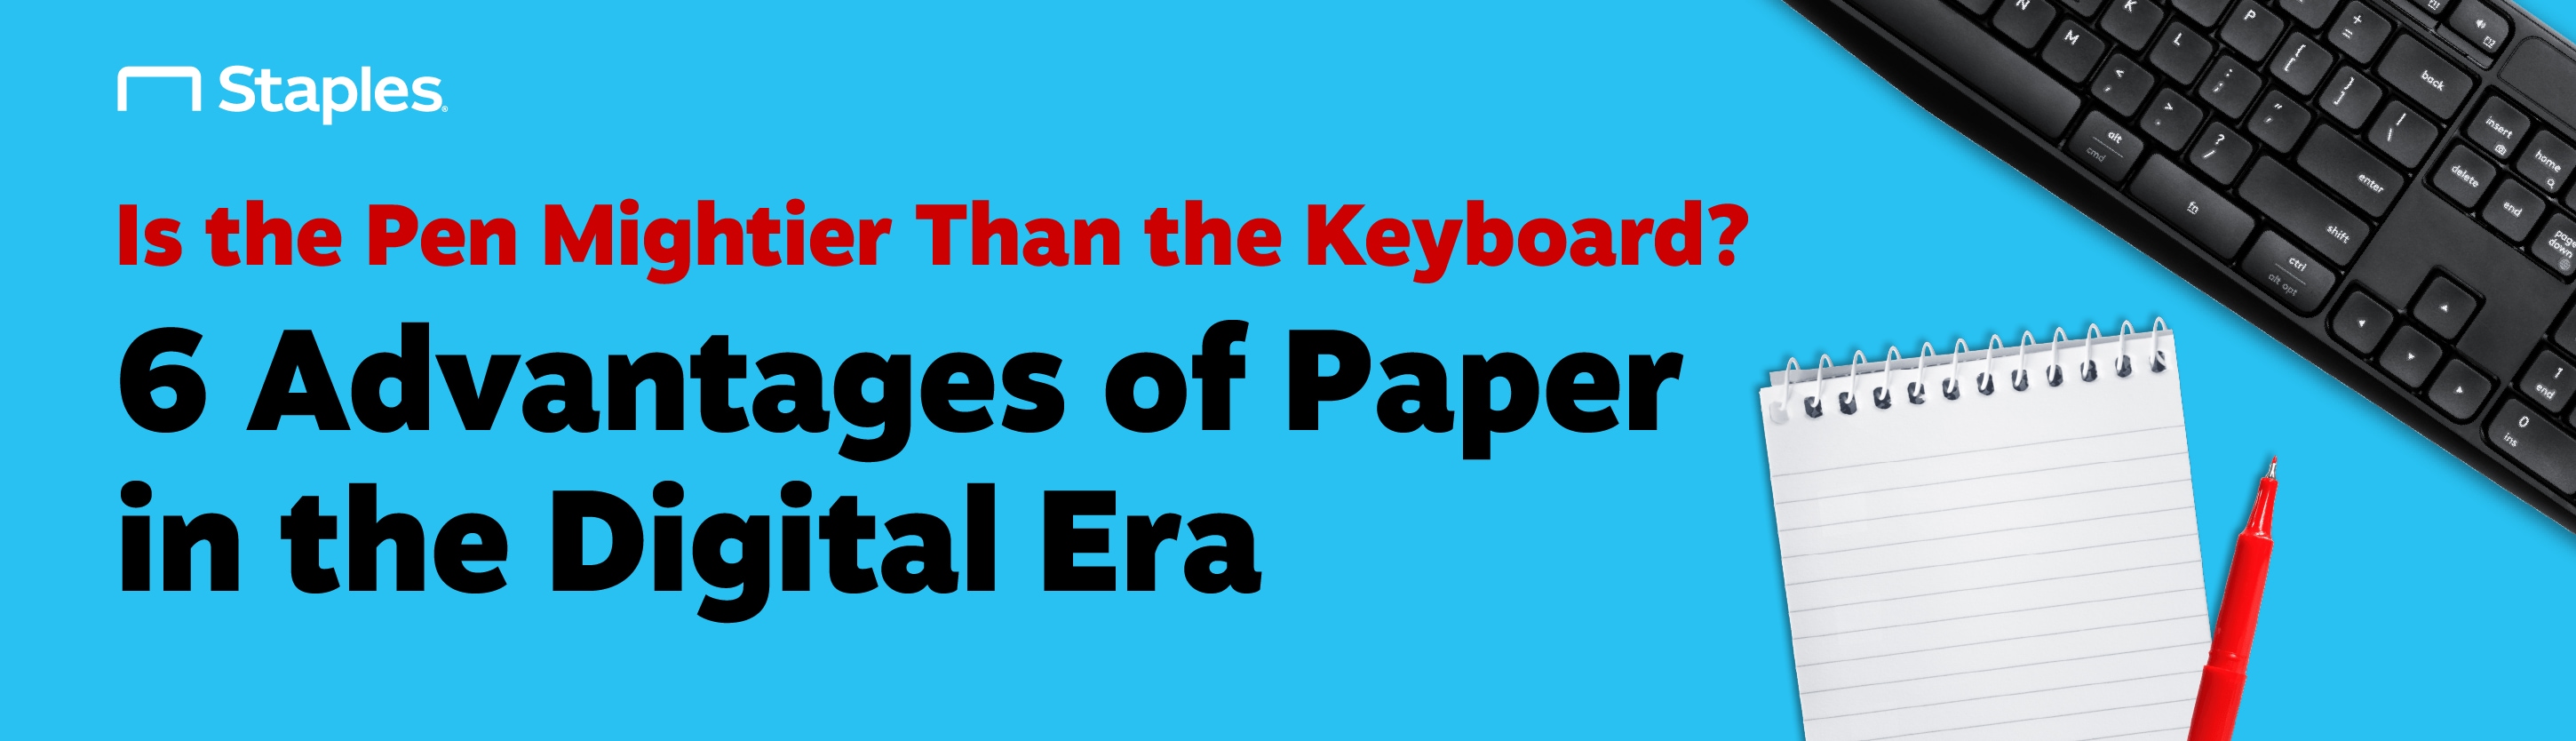 Introductory banner which reads: "6 Advantages of Paper in a Digital Era"